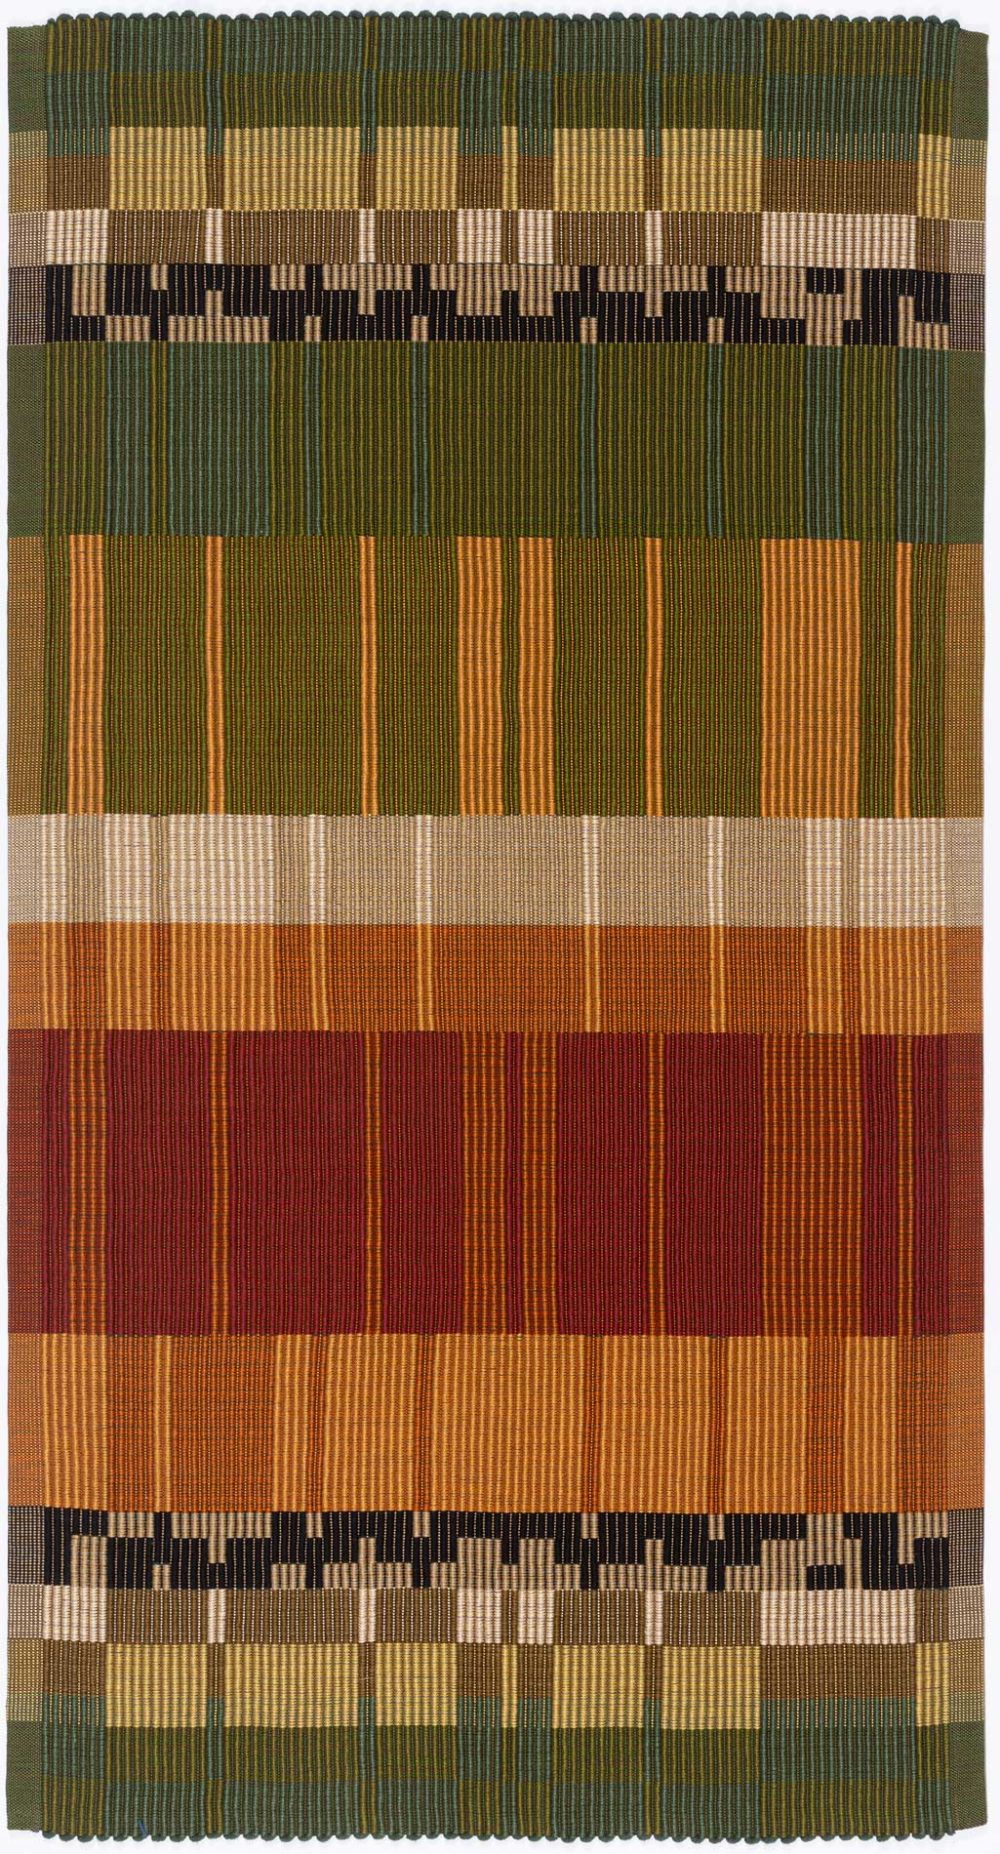 handwoven rep weave rug, contemporary design, reds, rust, olive green black, machine washable, cotton poly by kelly marshall